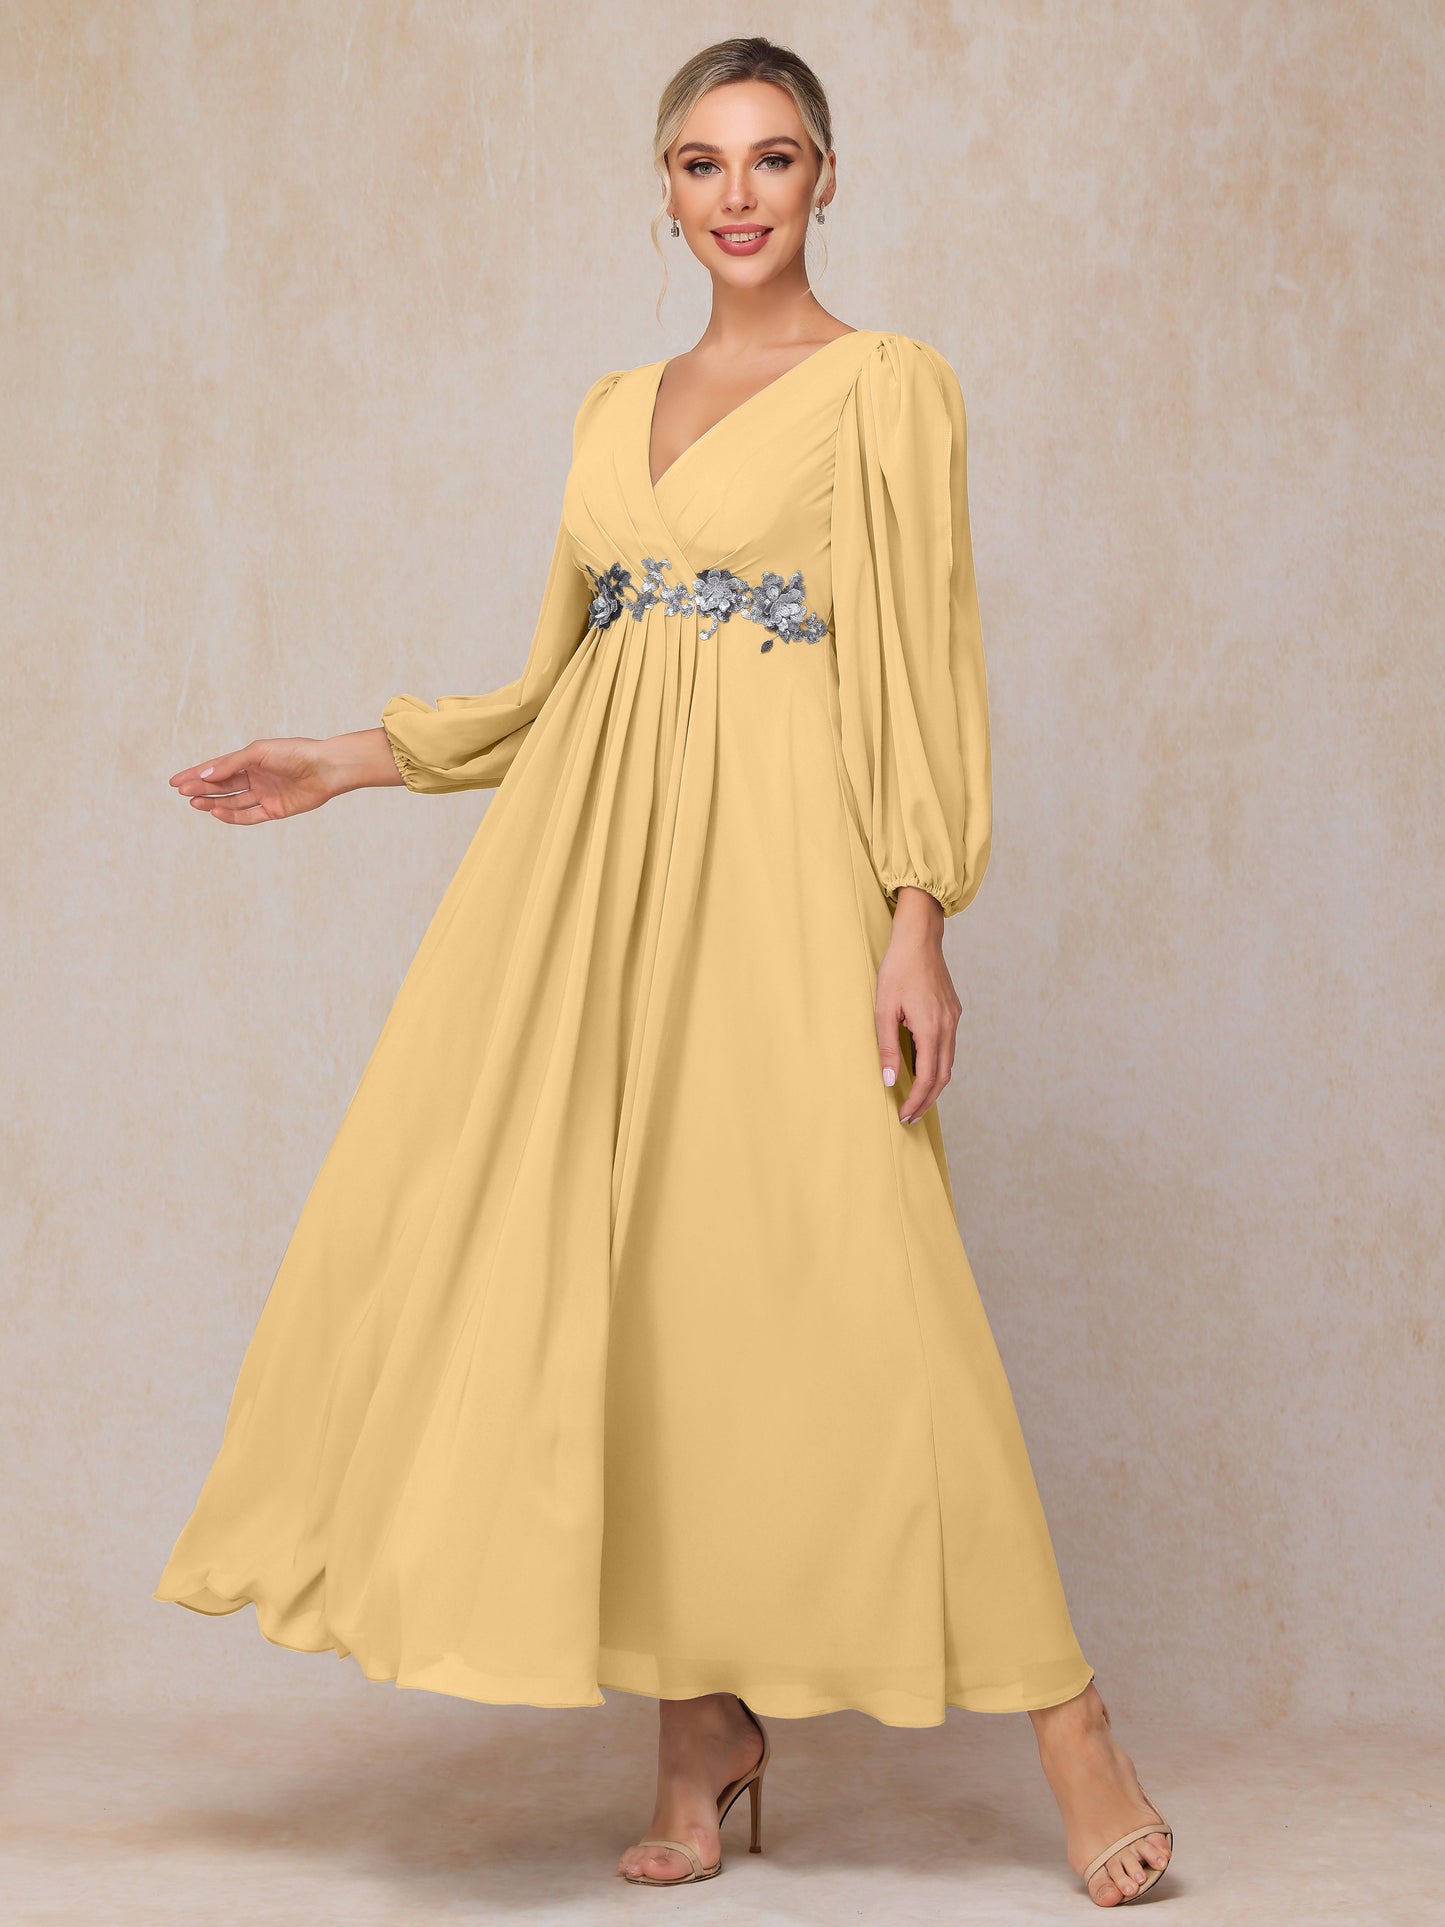 Long Sleeves V Neck Ankle Length Chiffon Wedding Guest Dresses